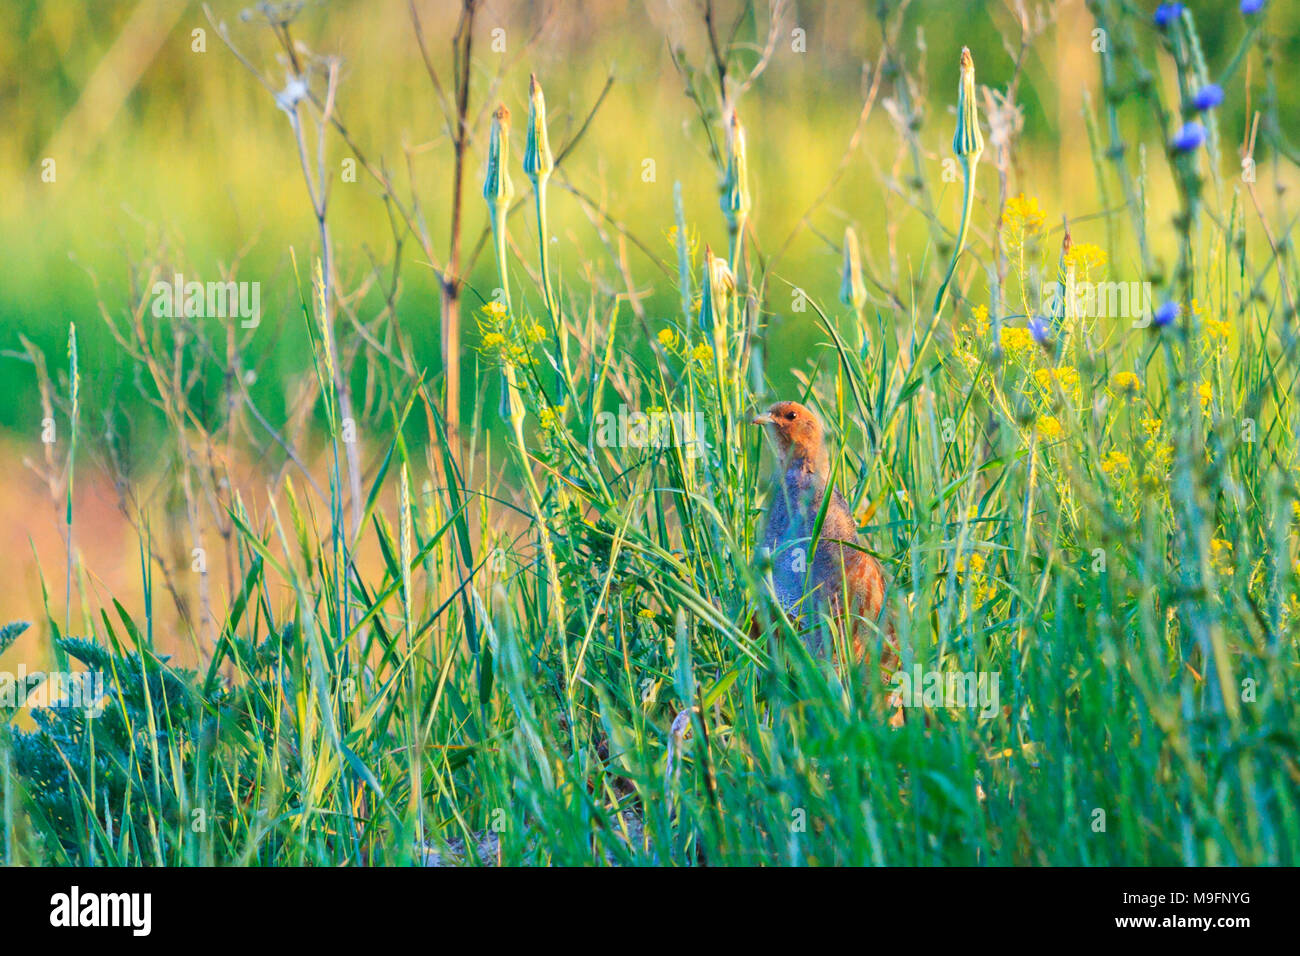 Gray partridge in a summer grasses , birds, wildlife and season change Stock Photo